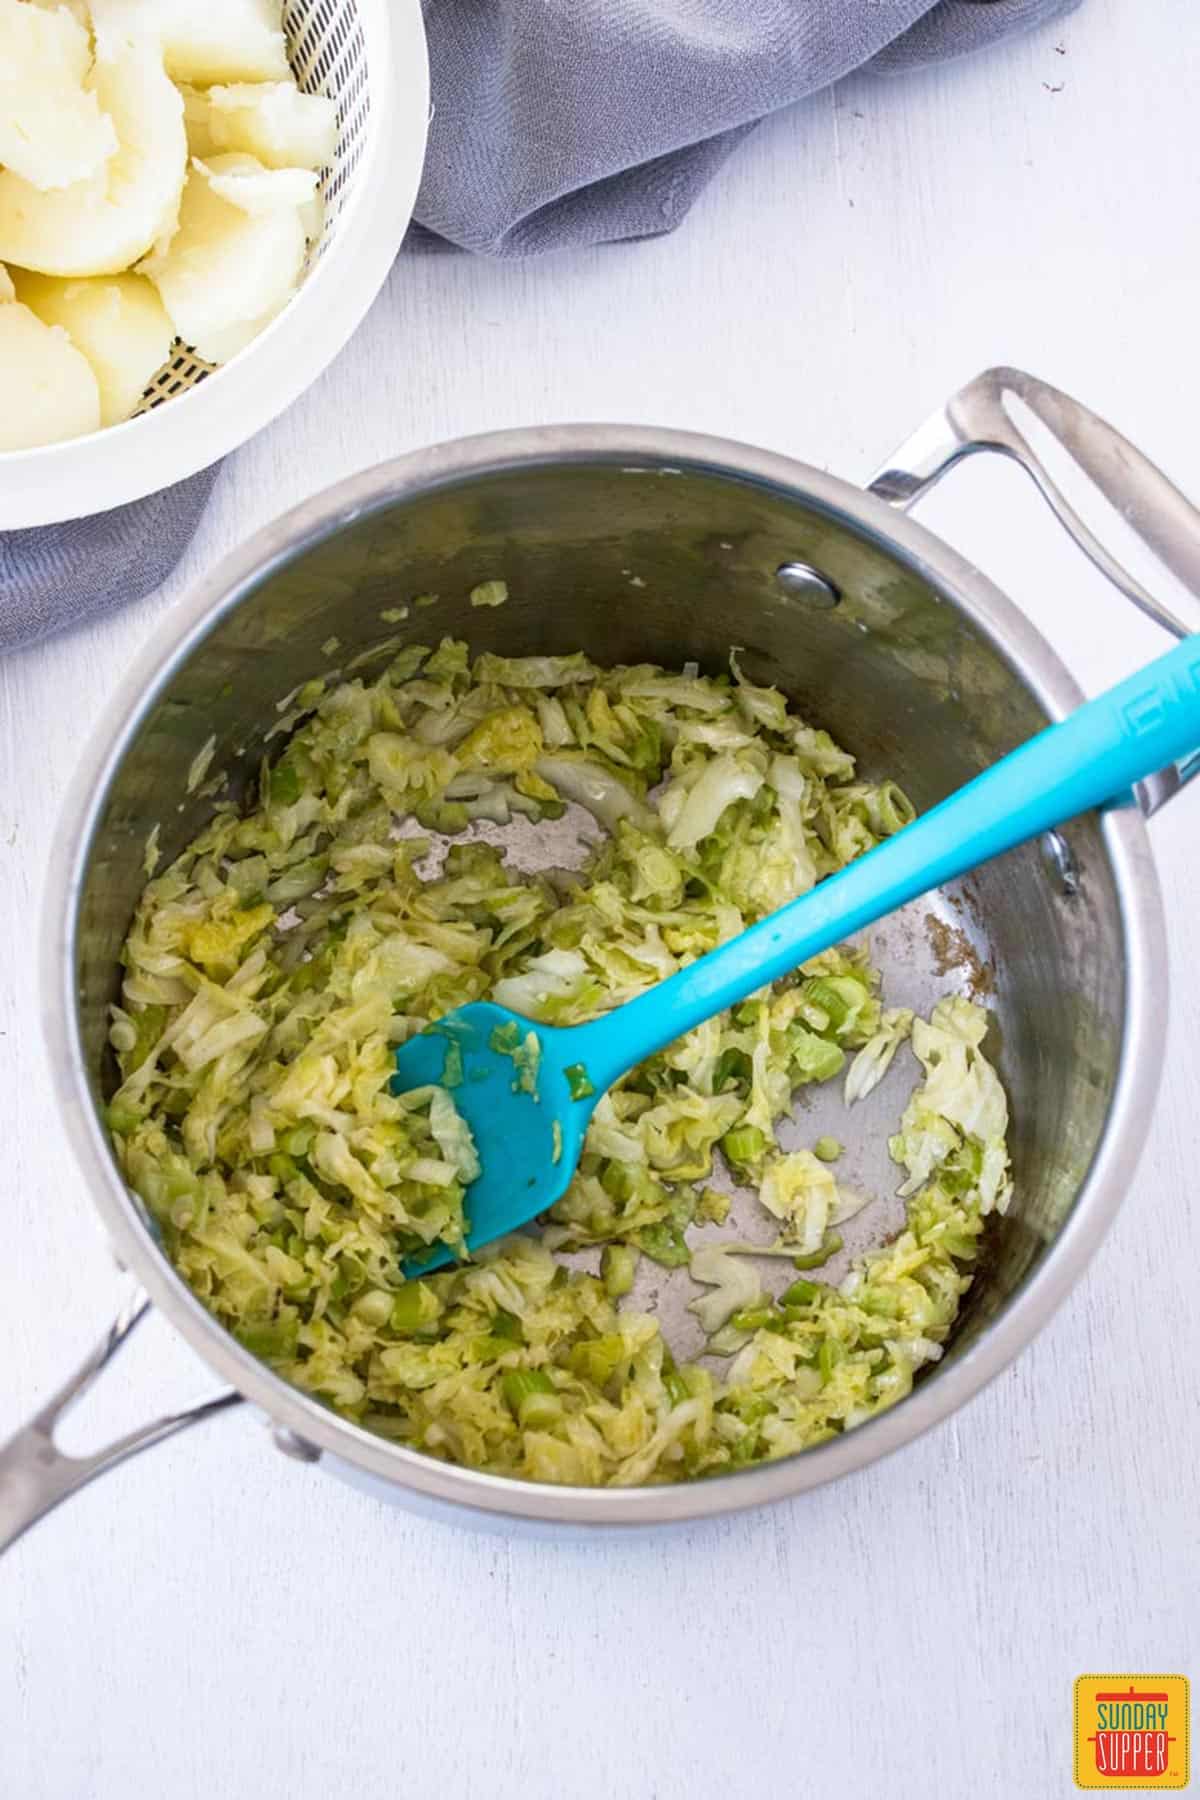 Cabbage added to saucepan